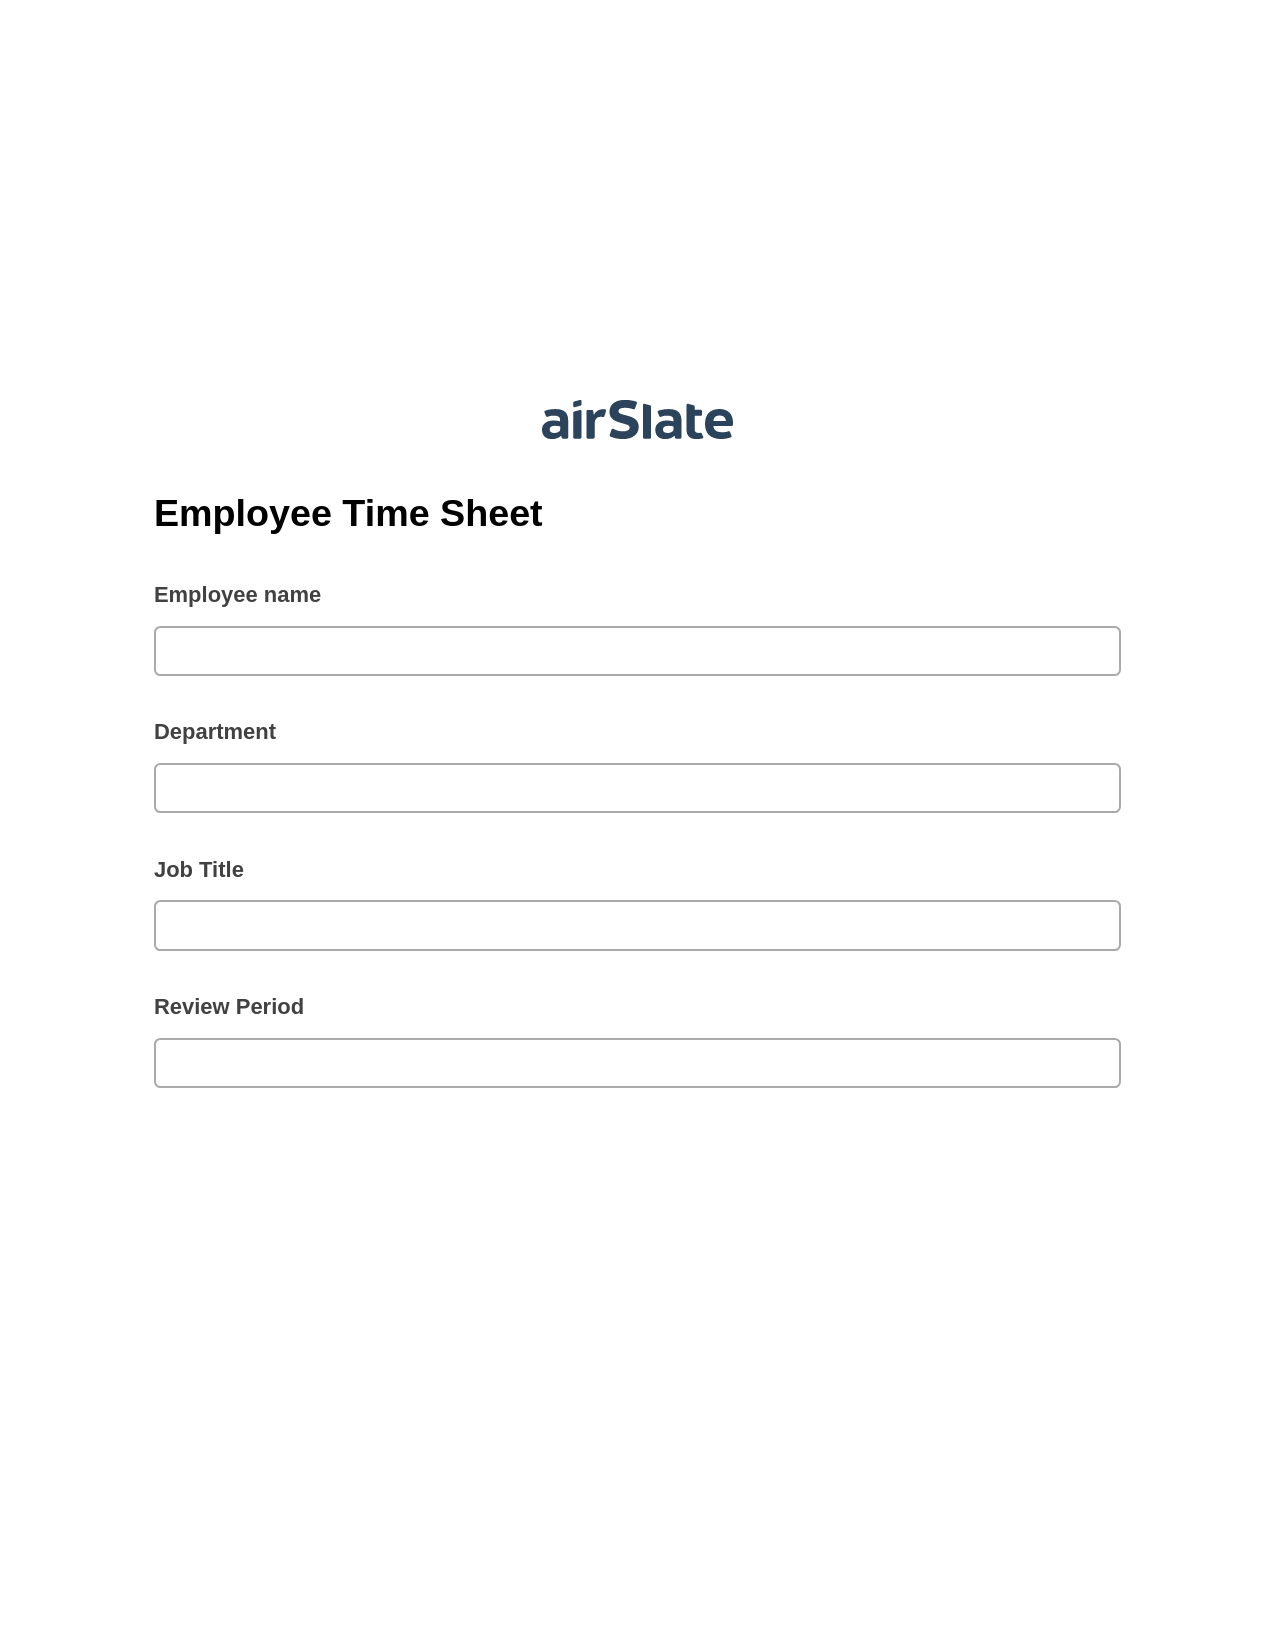 Employee Time Sheet Pre-fill from Excel Spreadsheet Bot, Create Salesforce Records Bot, Export to Google Sheet Bot